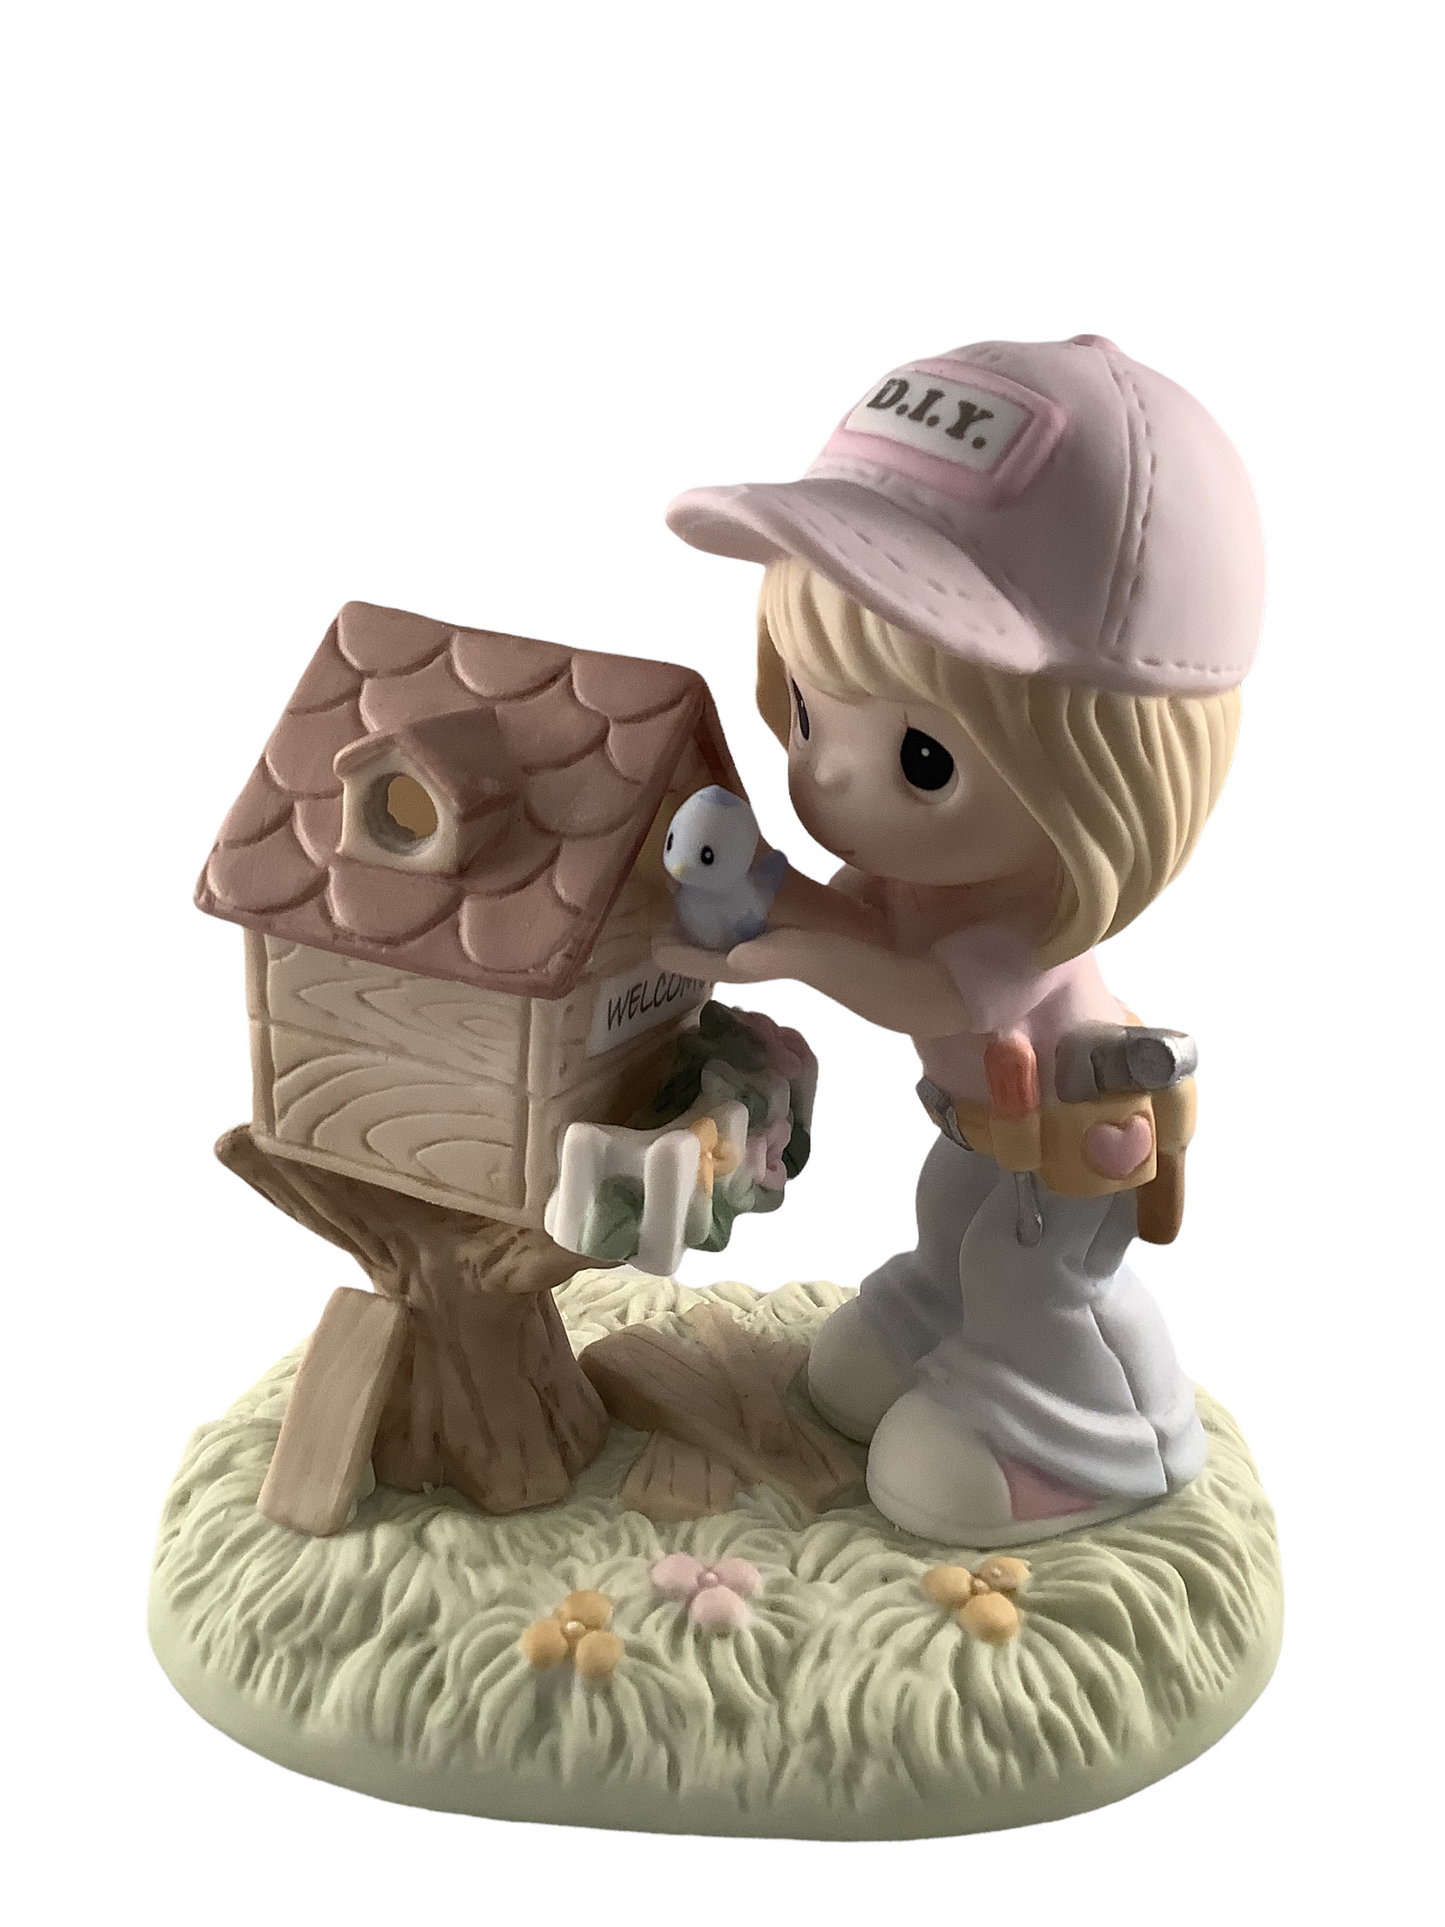 Using My Gifts Brings Happiness - Precious Moment Figurine